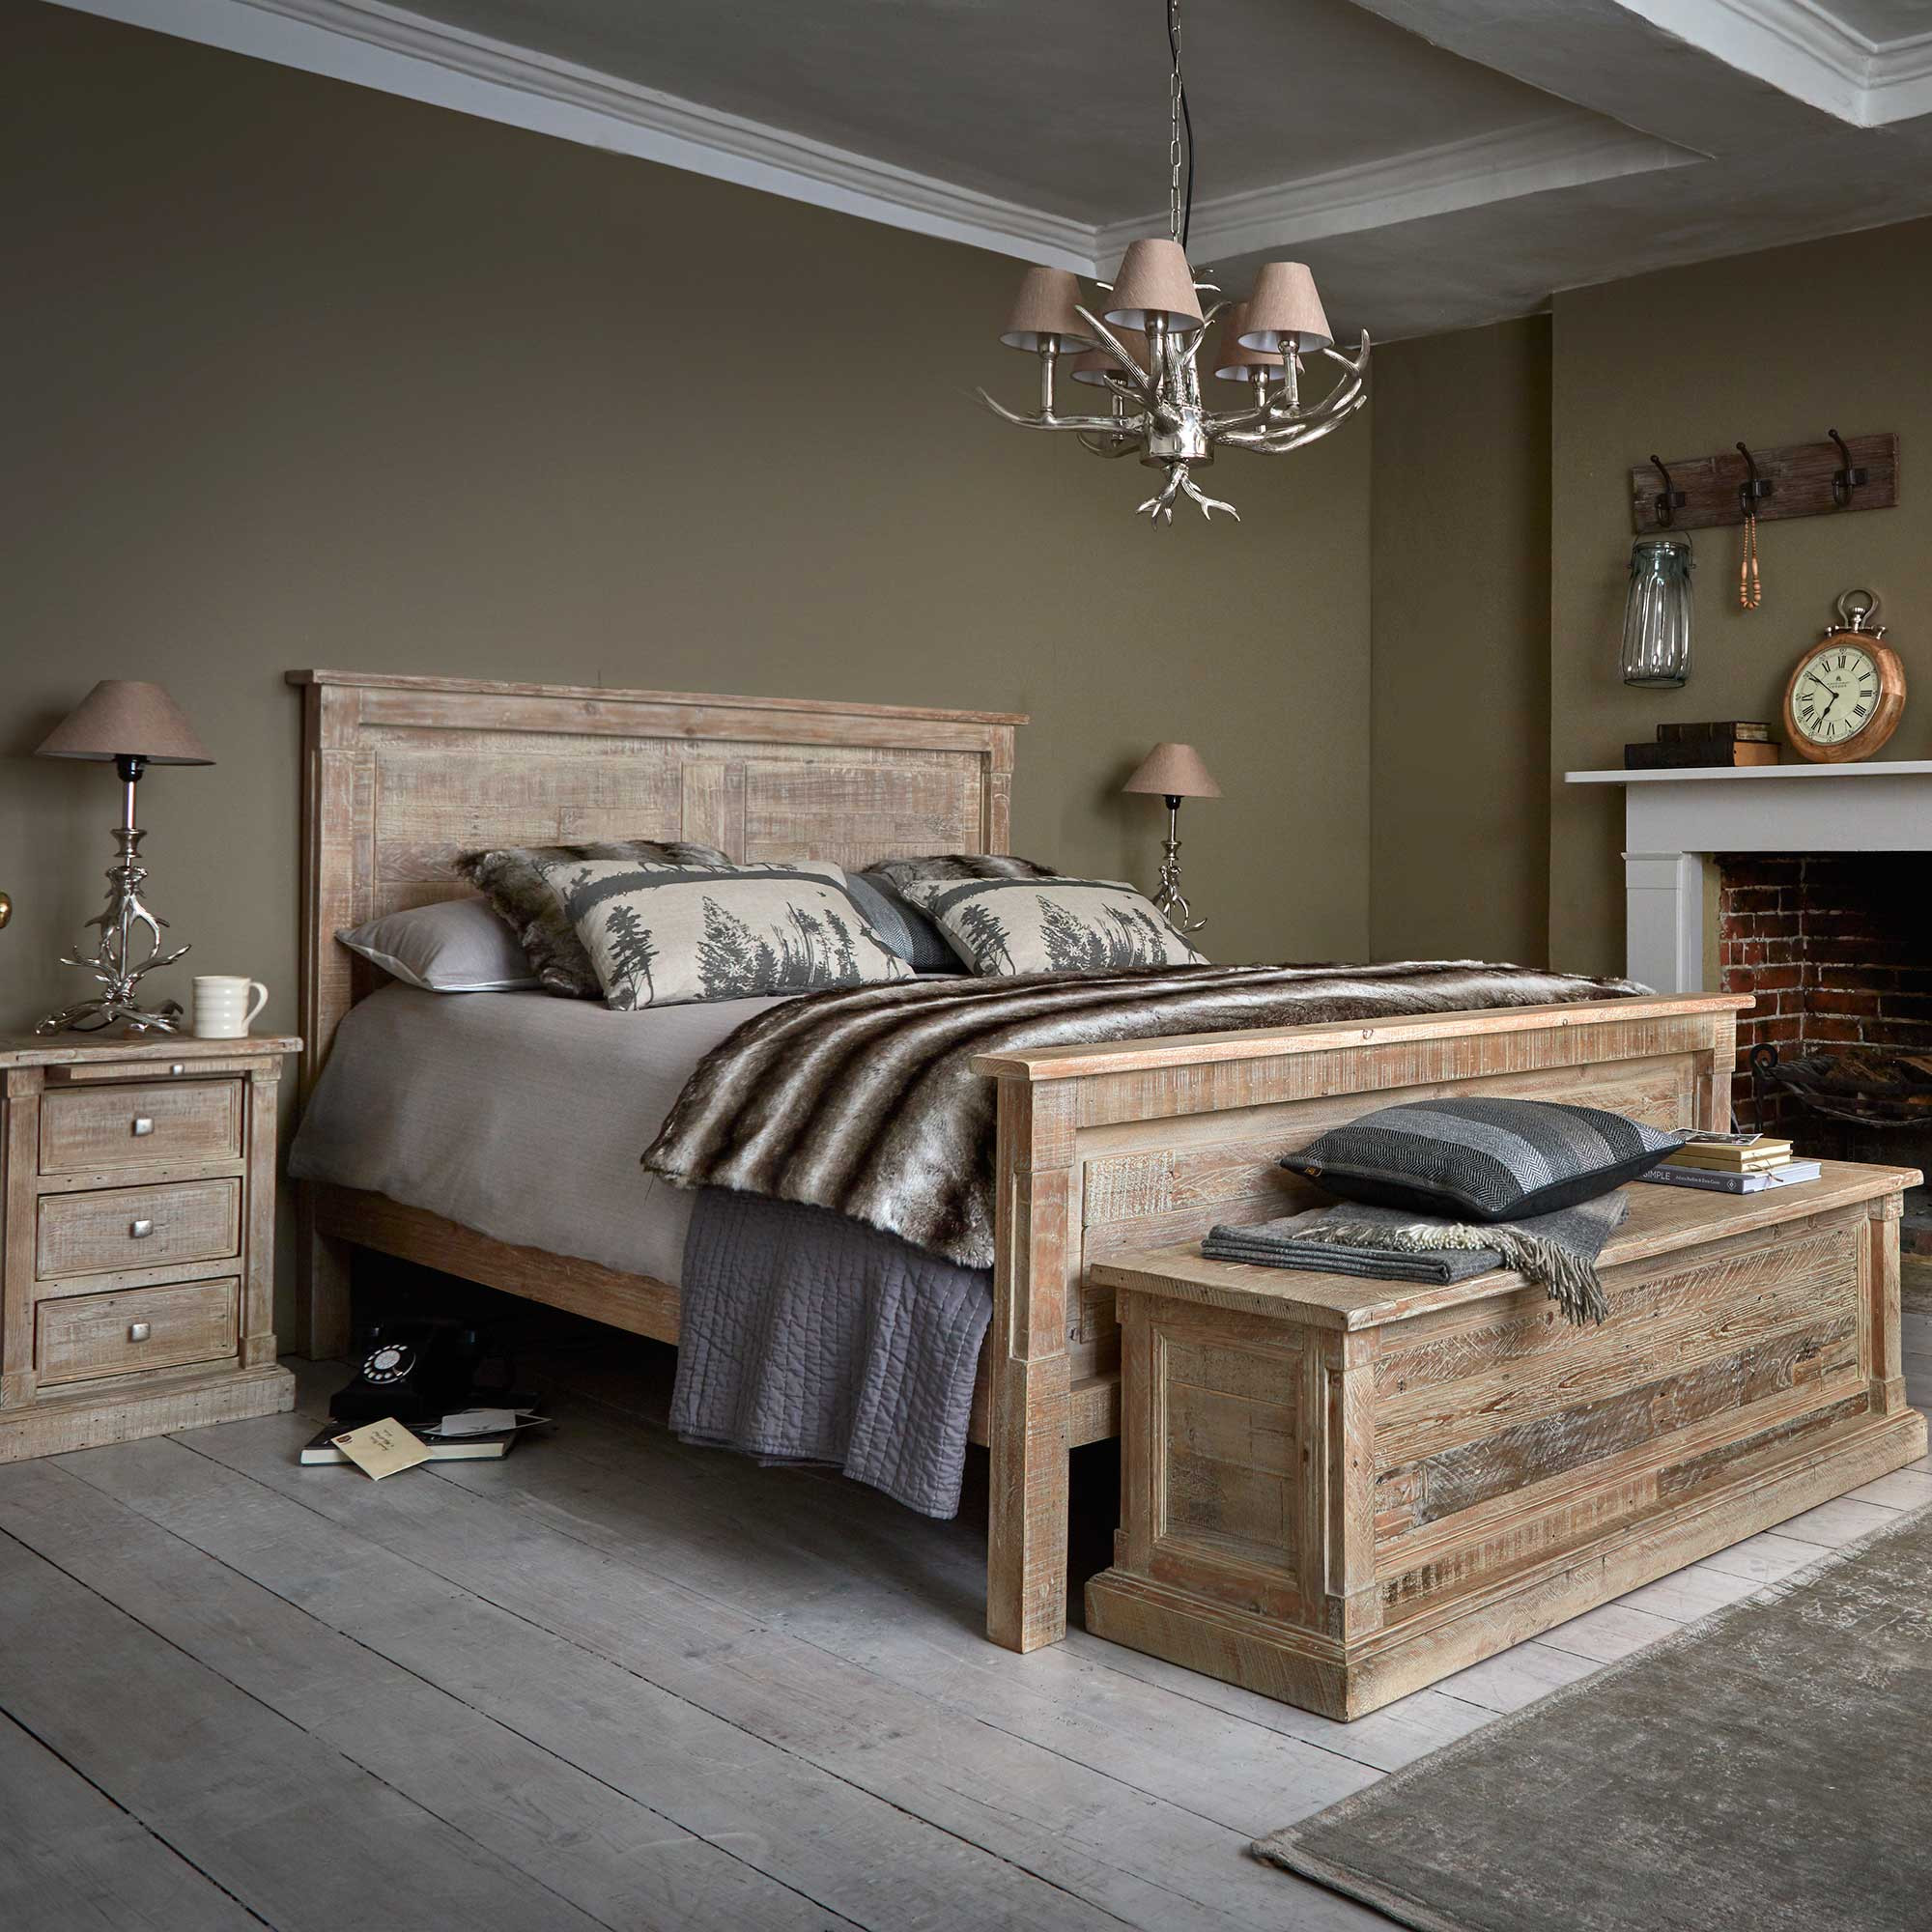 Rustic Wood Bedroom Furniture
 Bring in the New with our Winter Sale Picks Your House